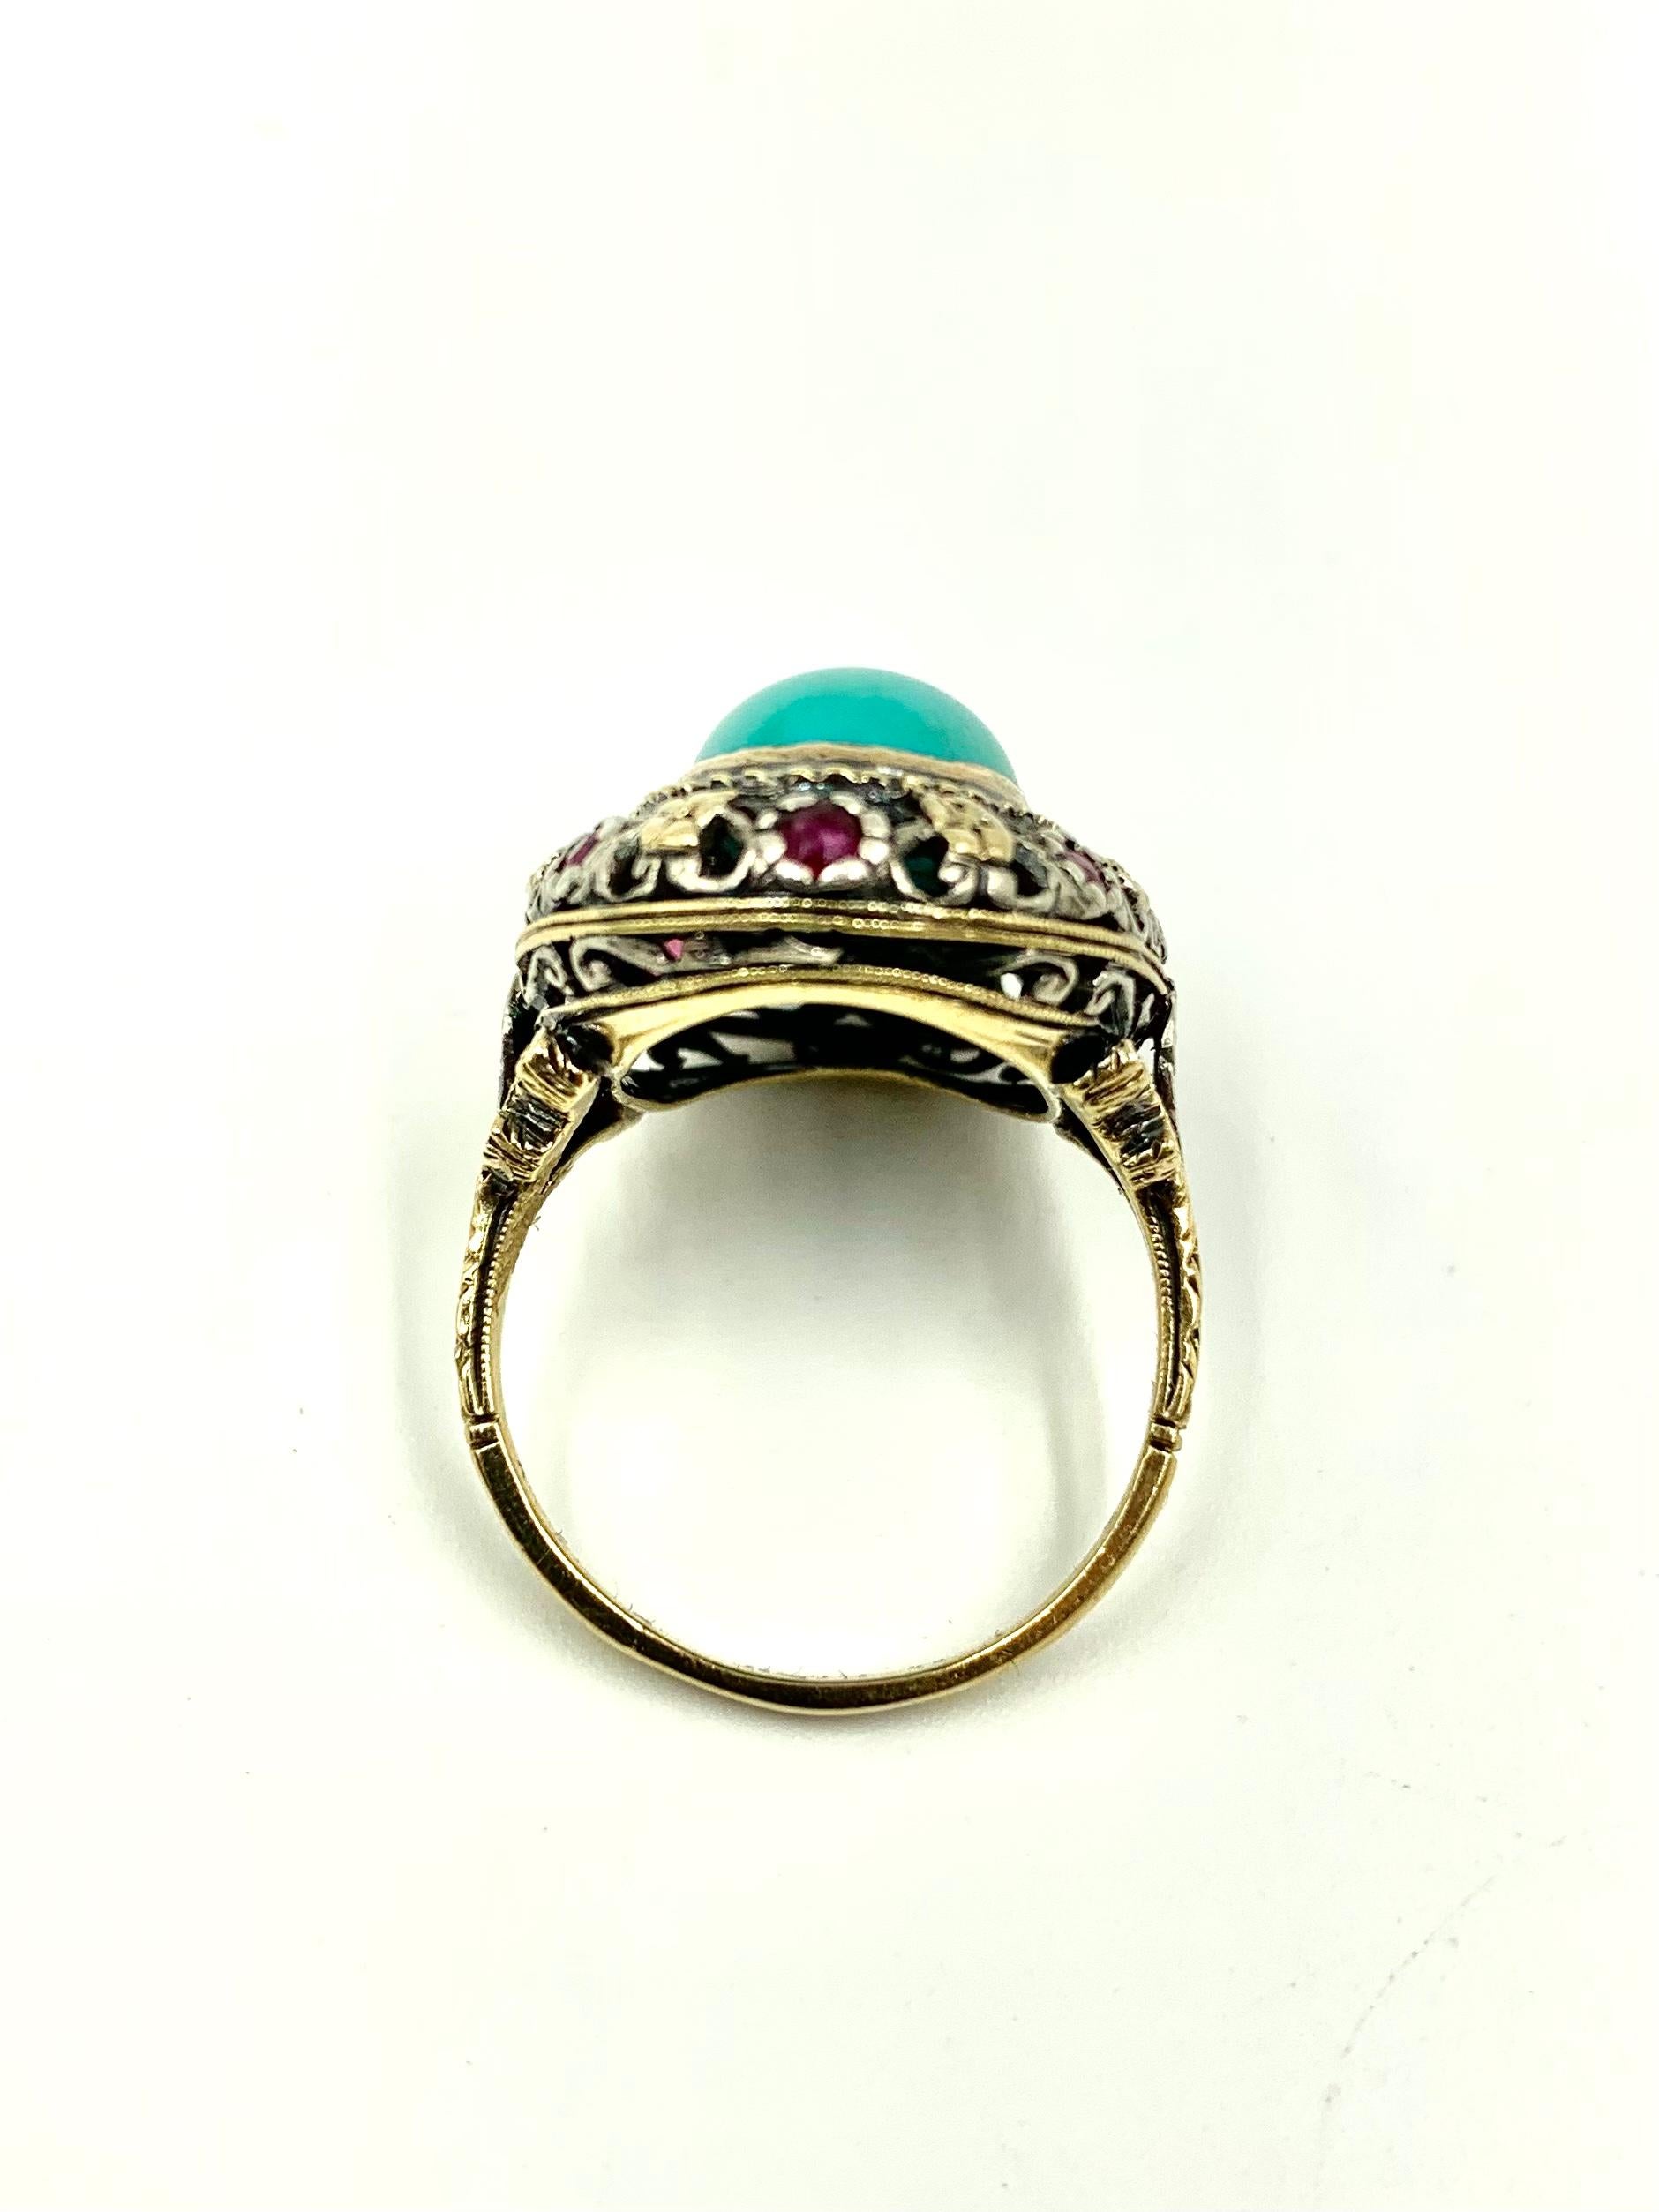 Antique Renaissance Style Turquoise, Ruby 18K Filigree Gold Ring, 19th Century For Sale 3